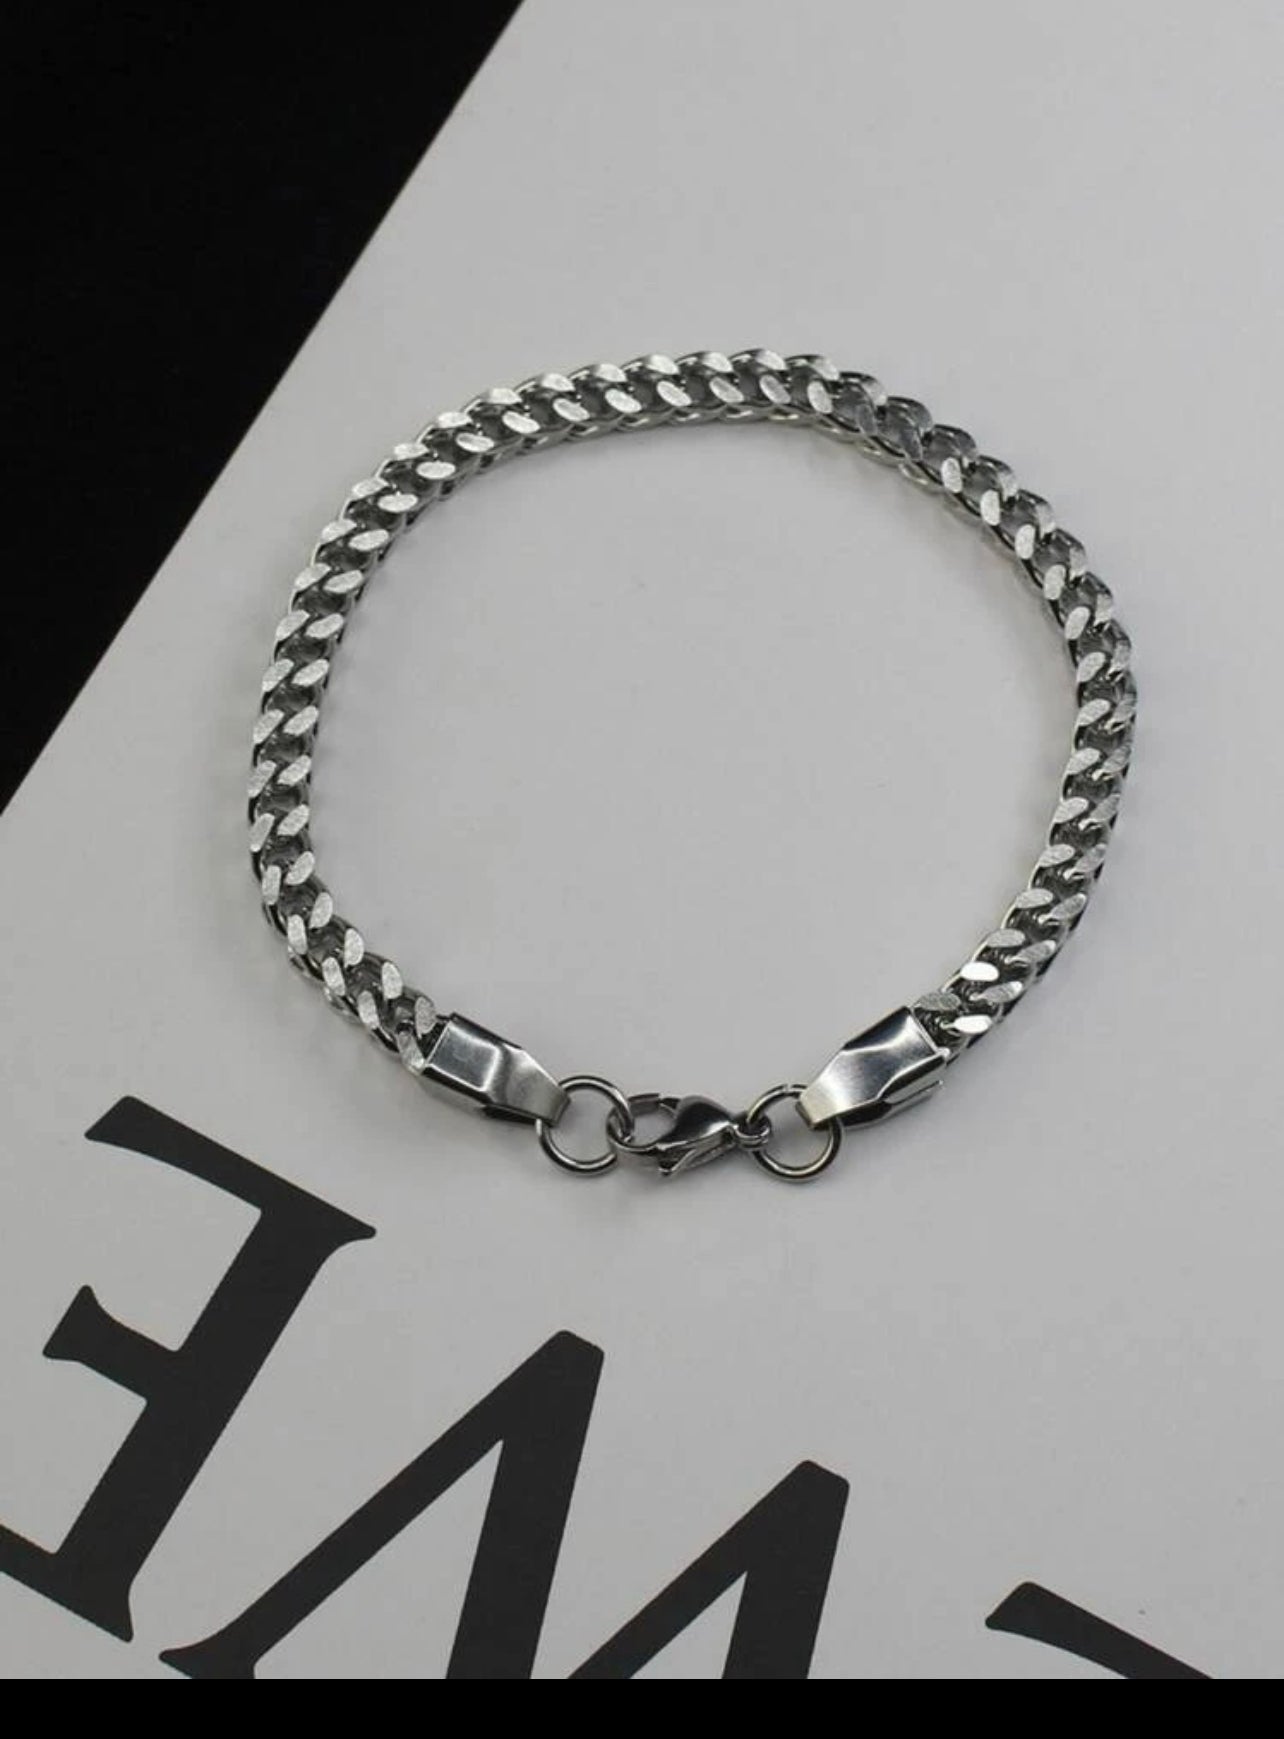 Zuri Men Chain Bracelet Stainless Steel  silver Punk Hip Pop Style for Jewelry Gift and for a Stylish Look Z125